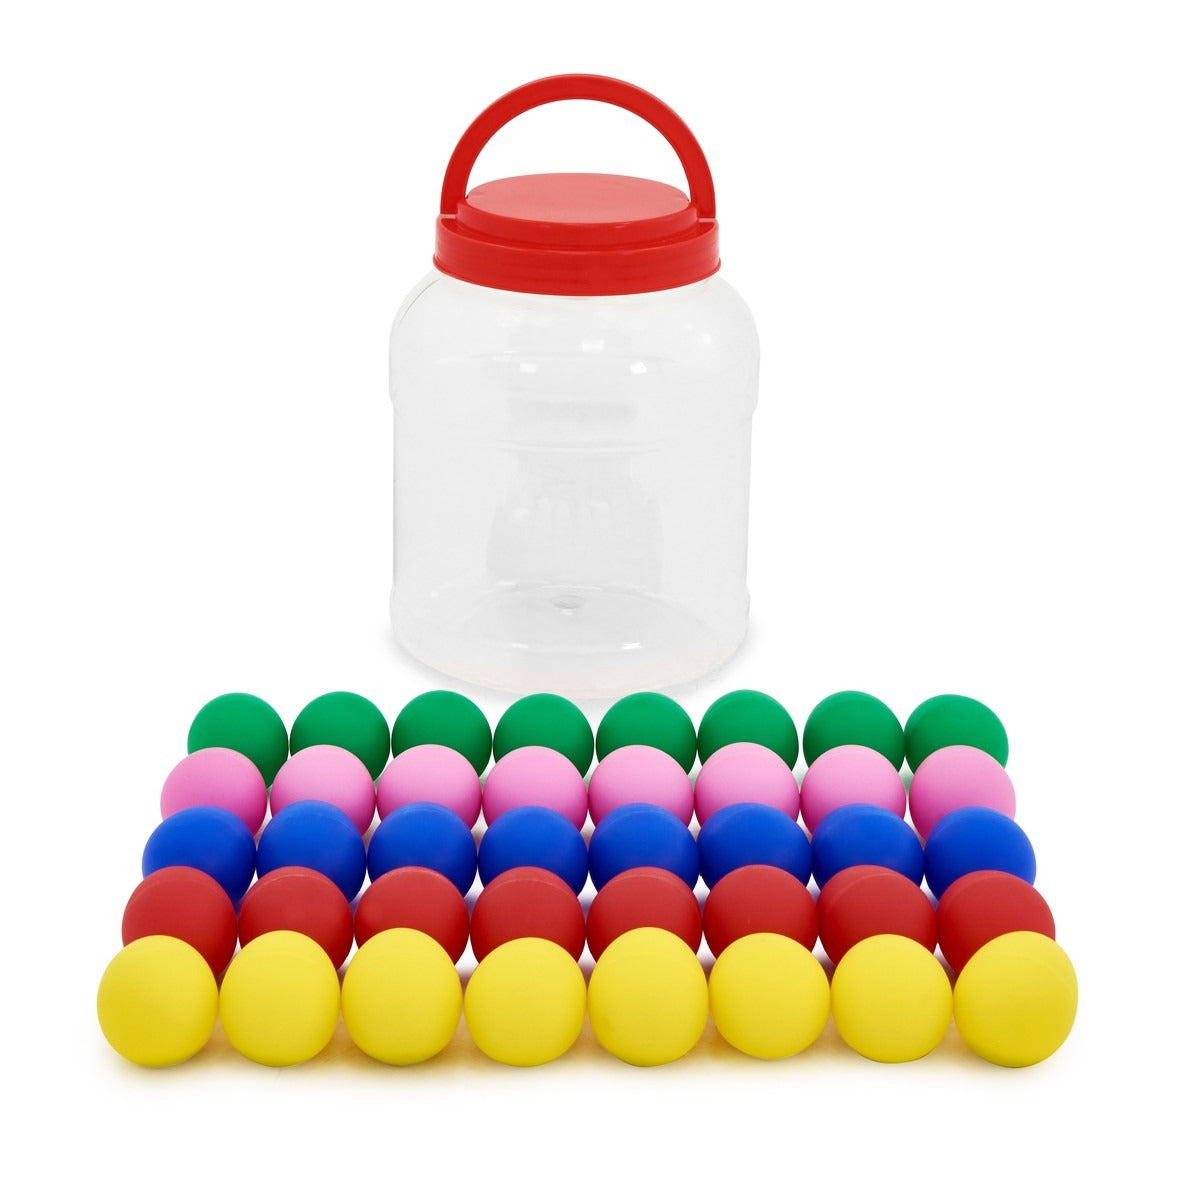 Egg Shaker Bucket of 40, The egg shaker pack of 40 is a great value percussion bundle. Great for encouraging group music in classroom. This pack gives you 20 pairs (40 individual) shakers to experiment with. The Egg Shakers are very much like a maraca but with more subtlety and a higher pitch. These versatile egg-sized shakers are vital to any percussionist's collection. Key Features 20 Pairs Of Assorted Colour Egg Shakers - Great For Classrooms! Perfect for Latin and Orchestral Music Reliable Plastic Const